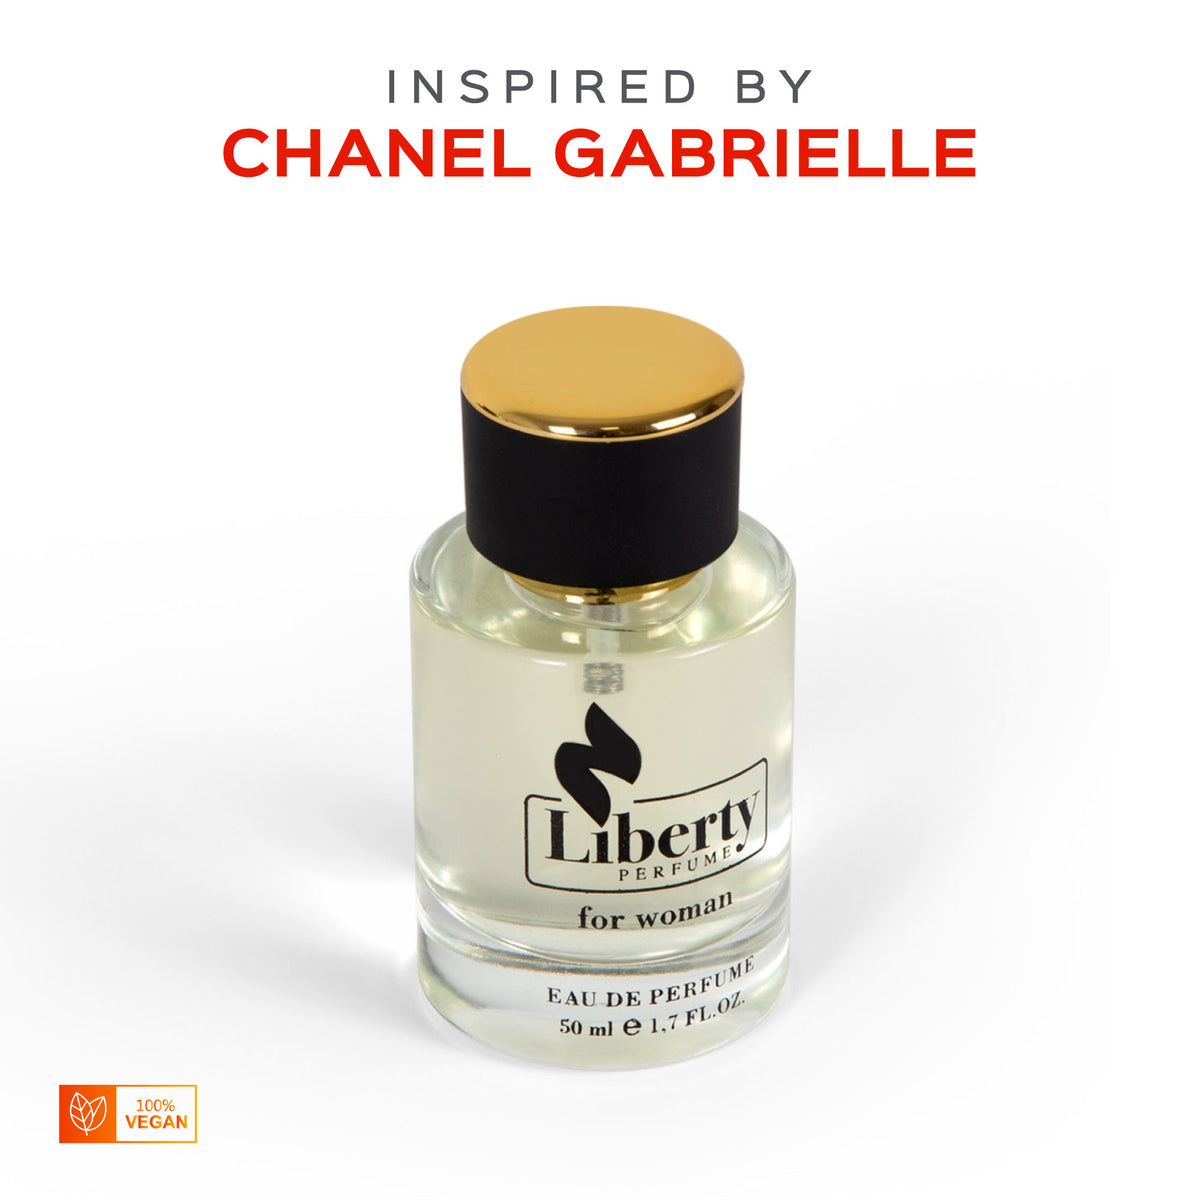 W11 Gabby the Beaut for Women Perfume - Inspired by Chanel Gabrielle -  $39.99 – Liberty Perfume